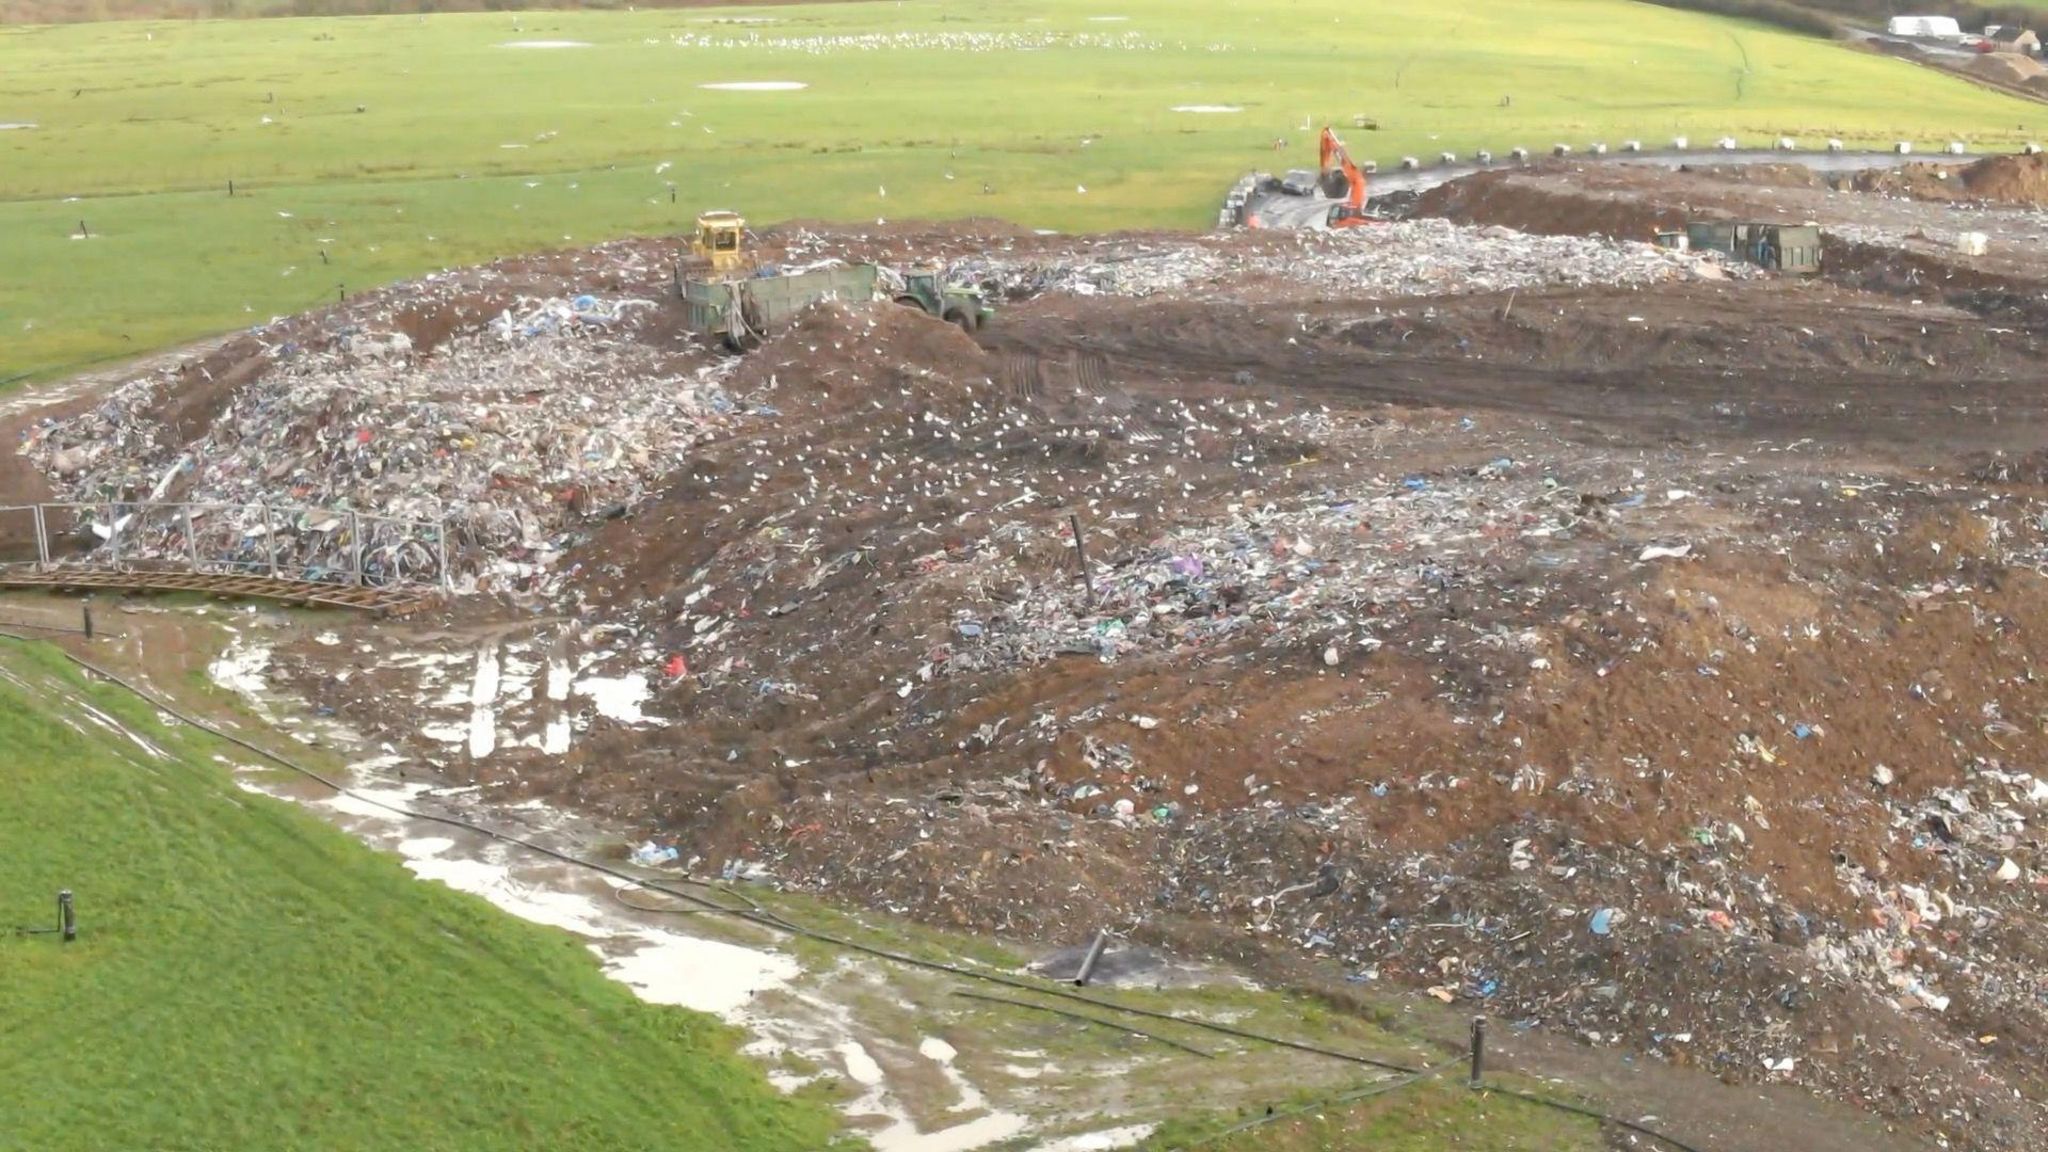 The view of Withyhedge landfill site 